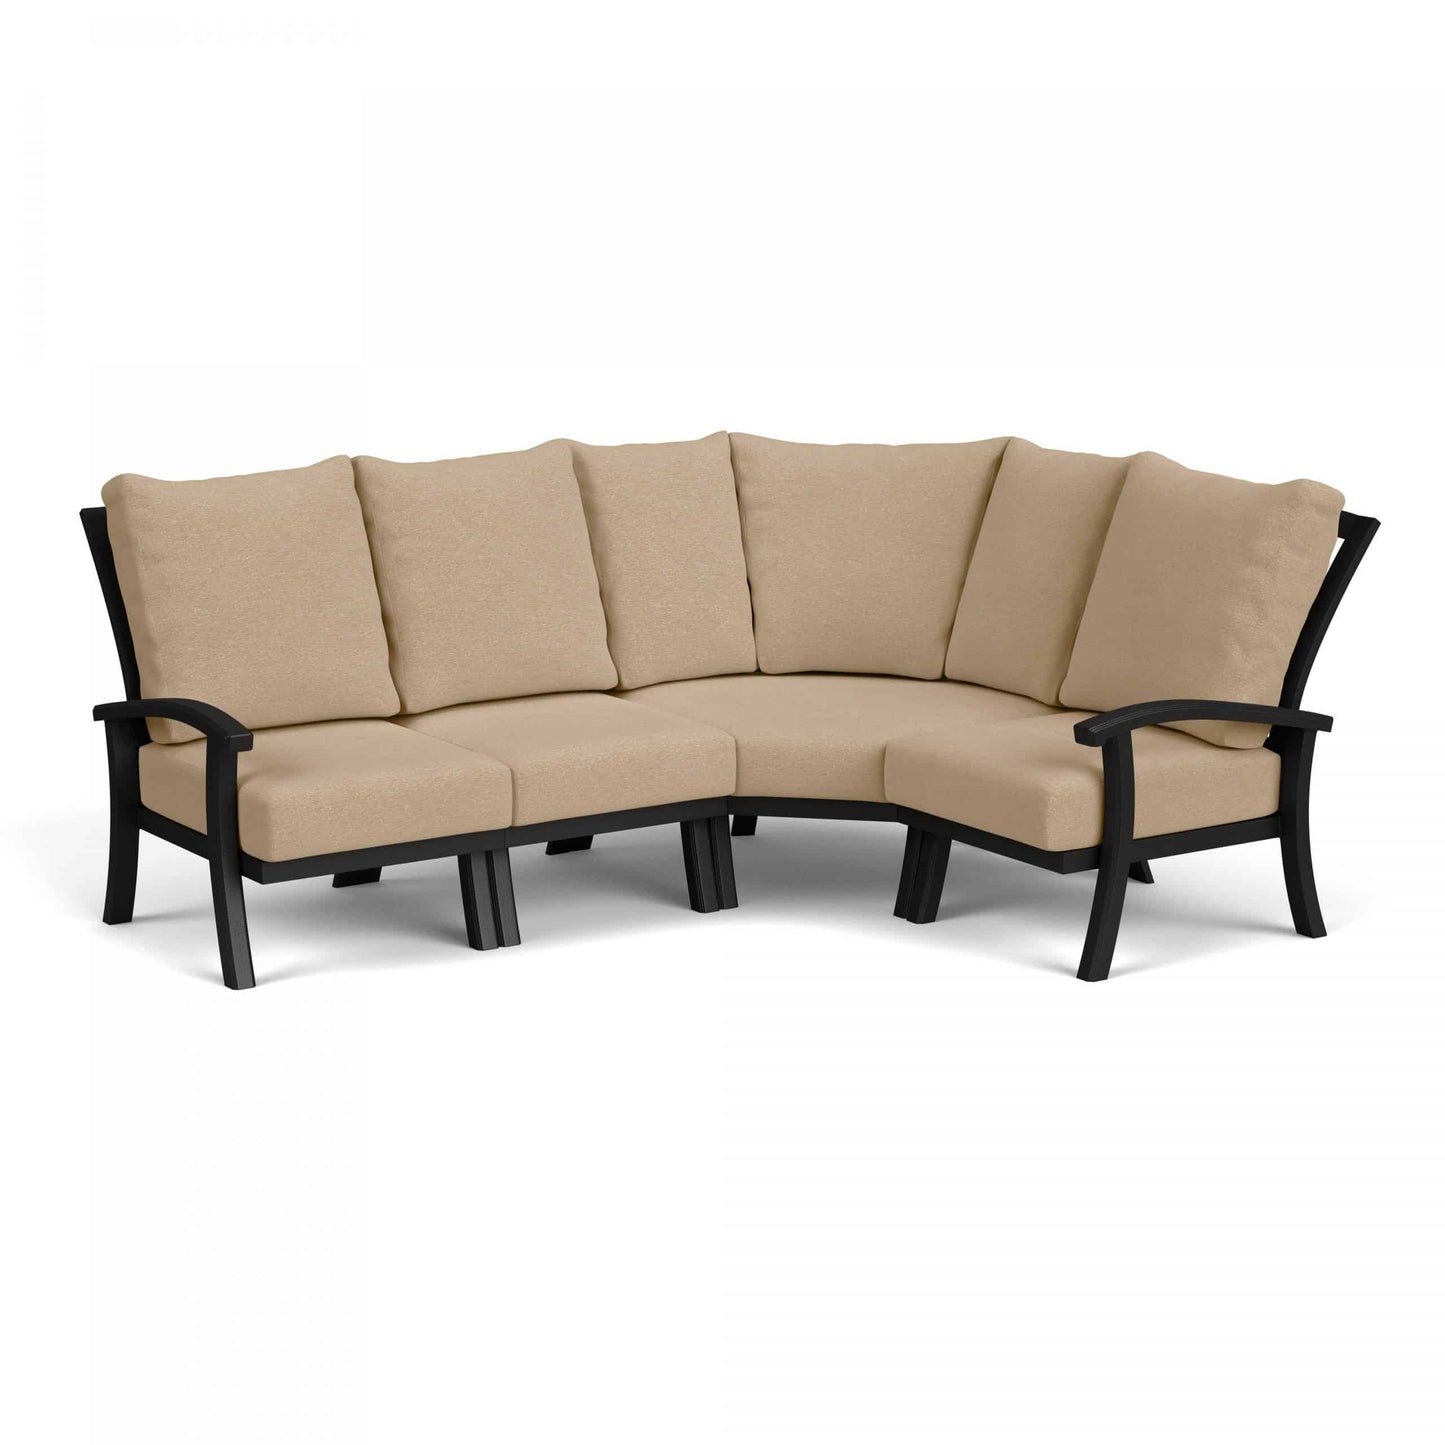 Cordova 4 Piece L-Shaped Sectional